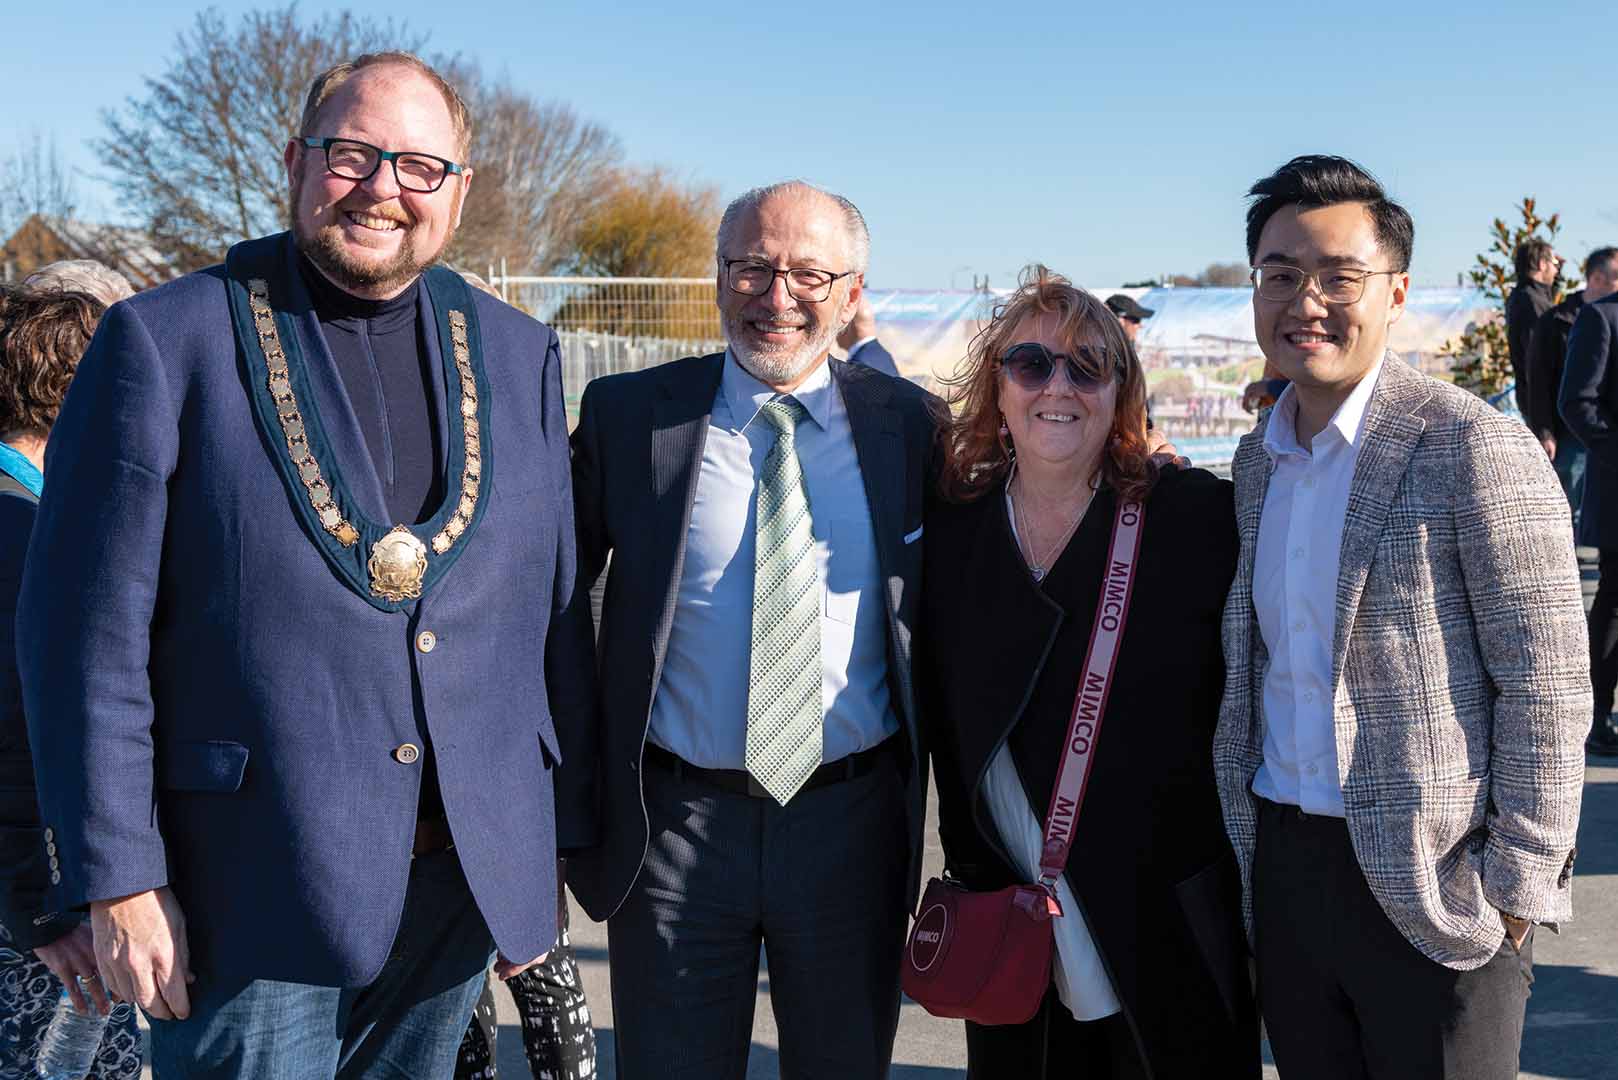 the mayor standing beside the land developers at the opening of Silverstream Boulevard